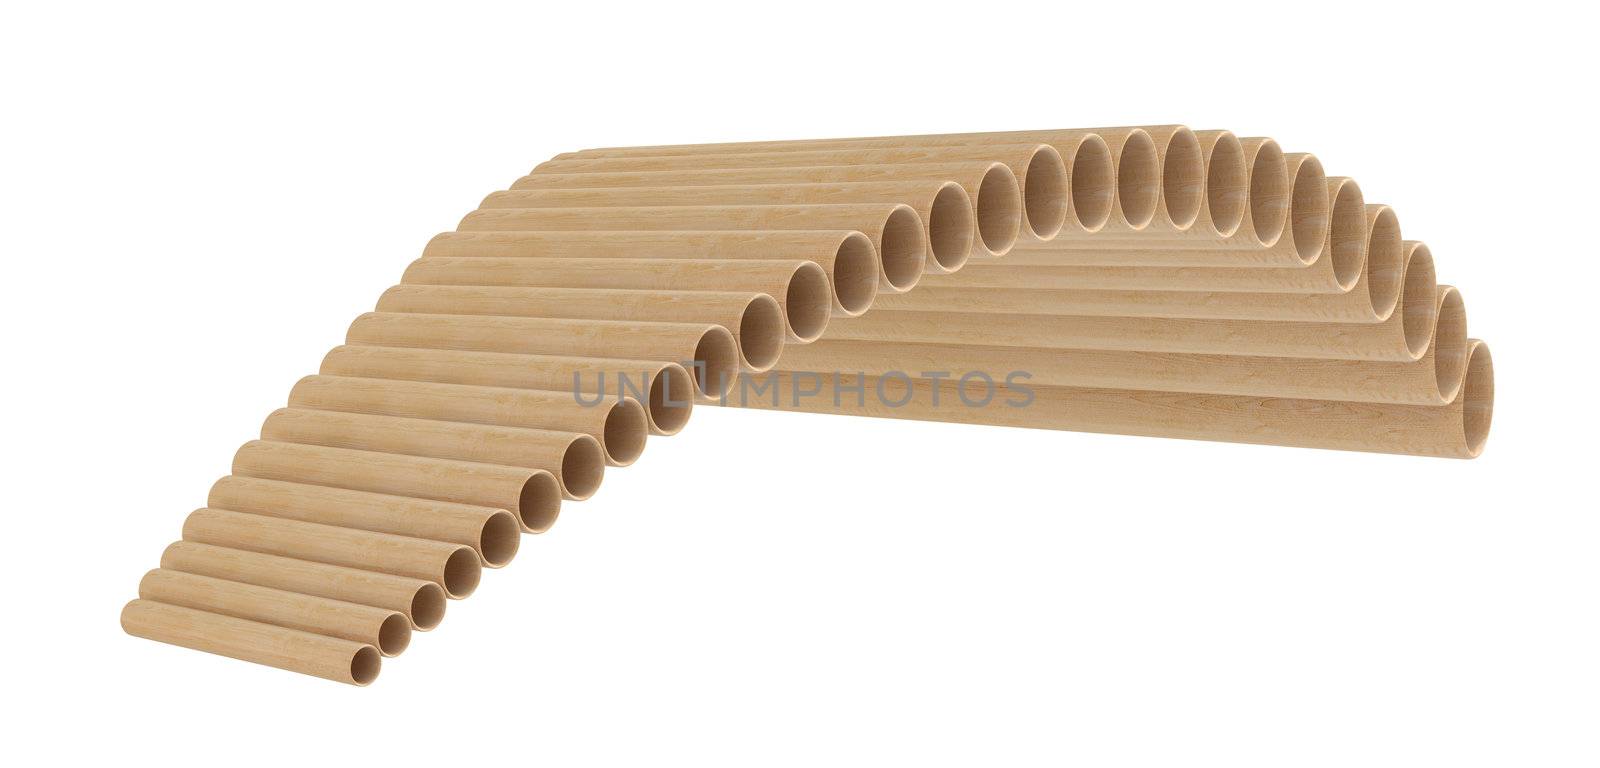 Pan flute or pan pipe, panflute isolated on white background